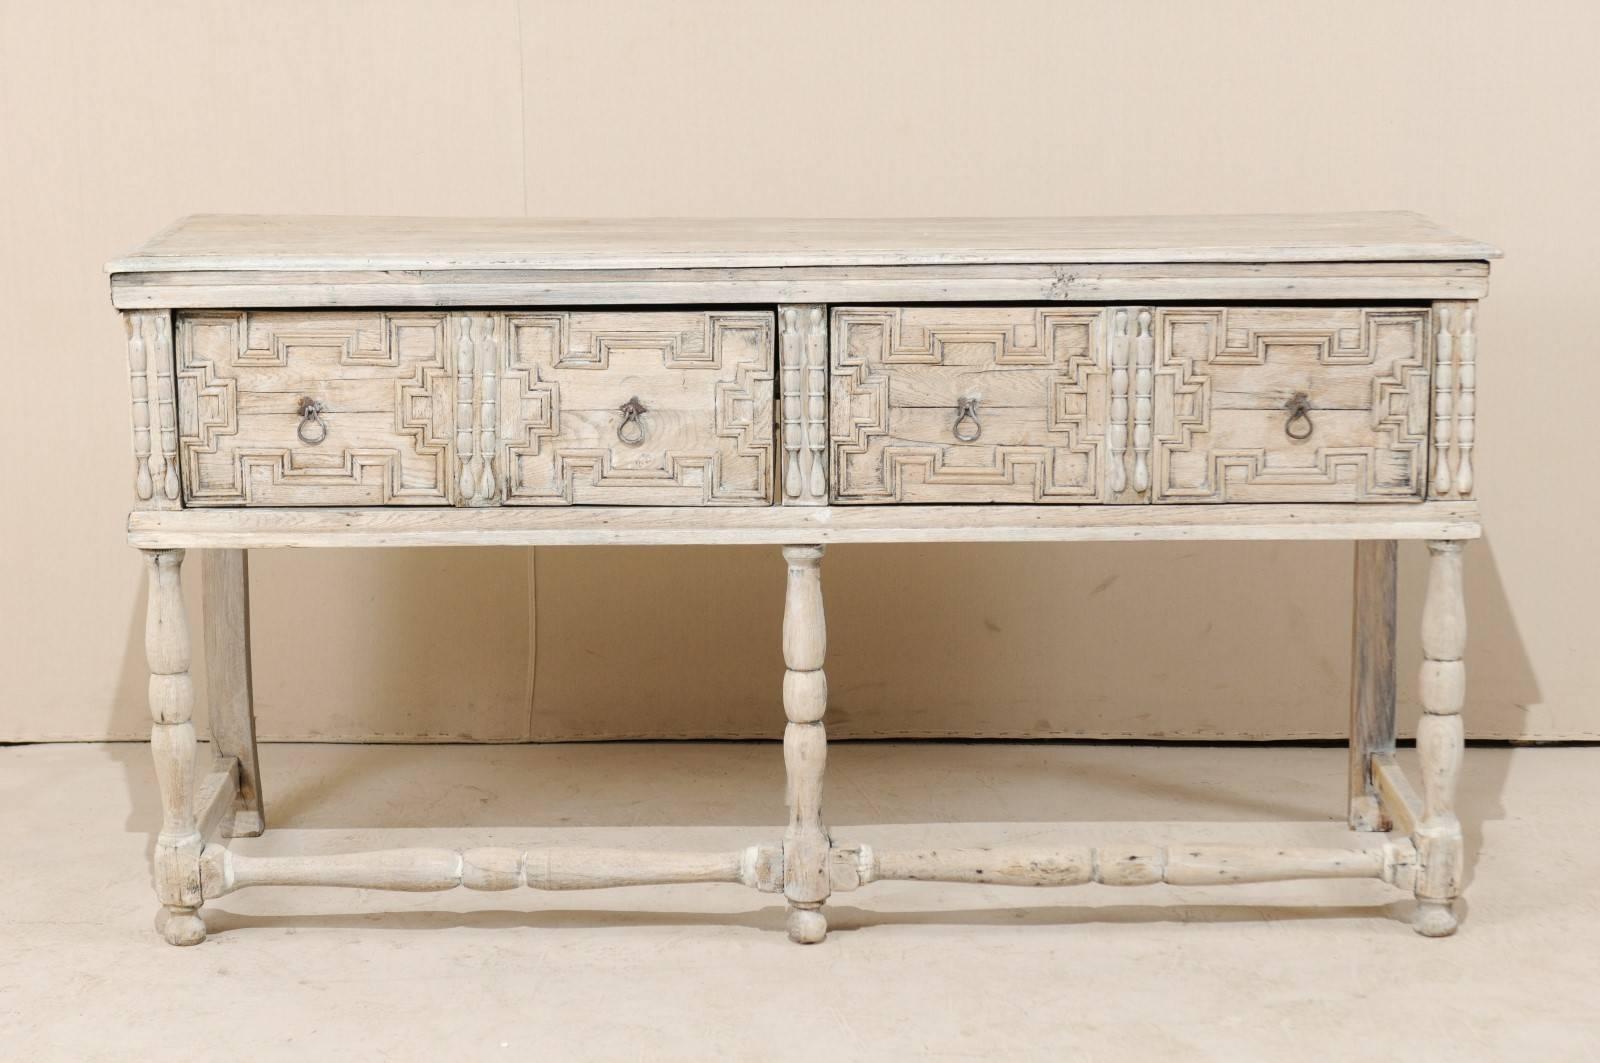 An 18th century English console table. This English console table, from the 18th century, features two large drawers which have deep, geometric carvings, carved vertical accents and original hardware. The table has turned legs and stretchers across